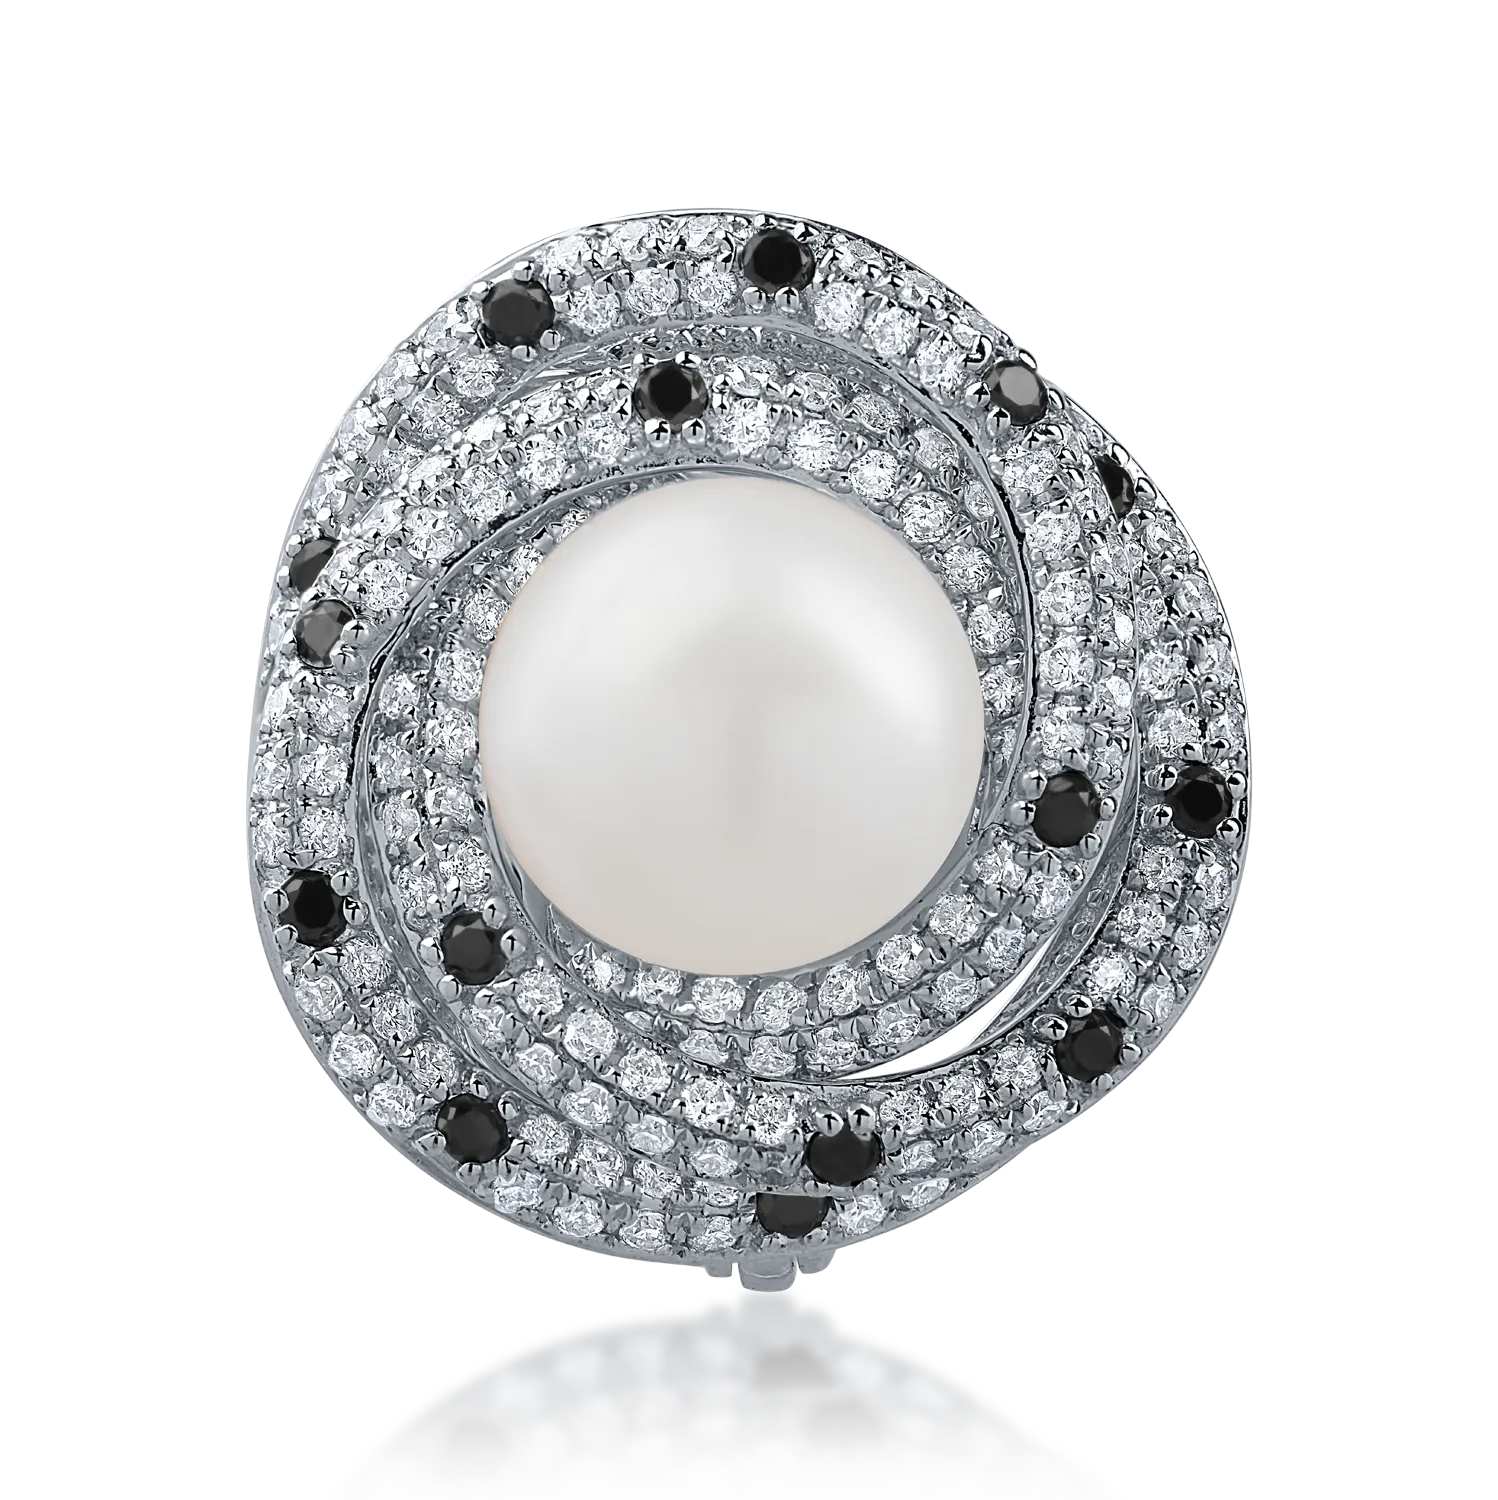 White gold brooch with 4.3ct fresh water pearl and 0.7ct diamonds